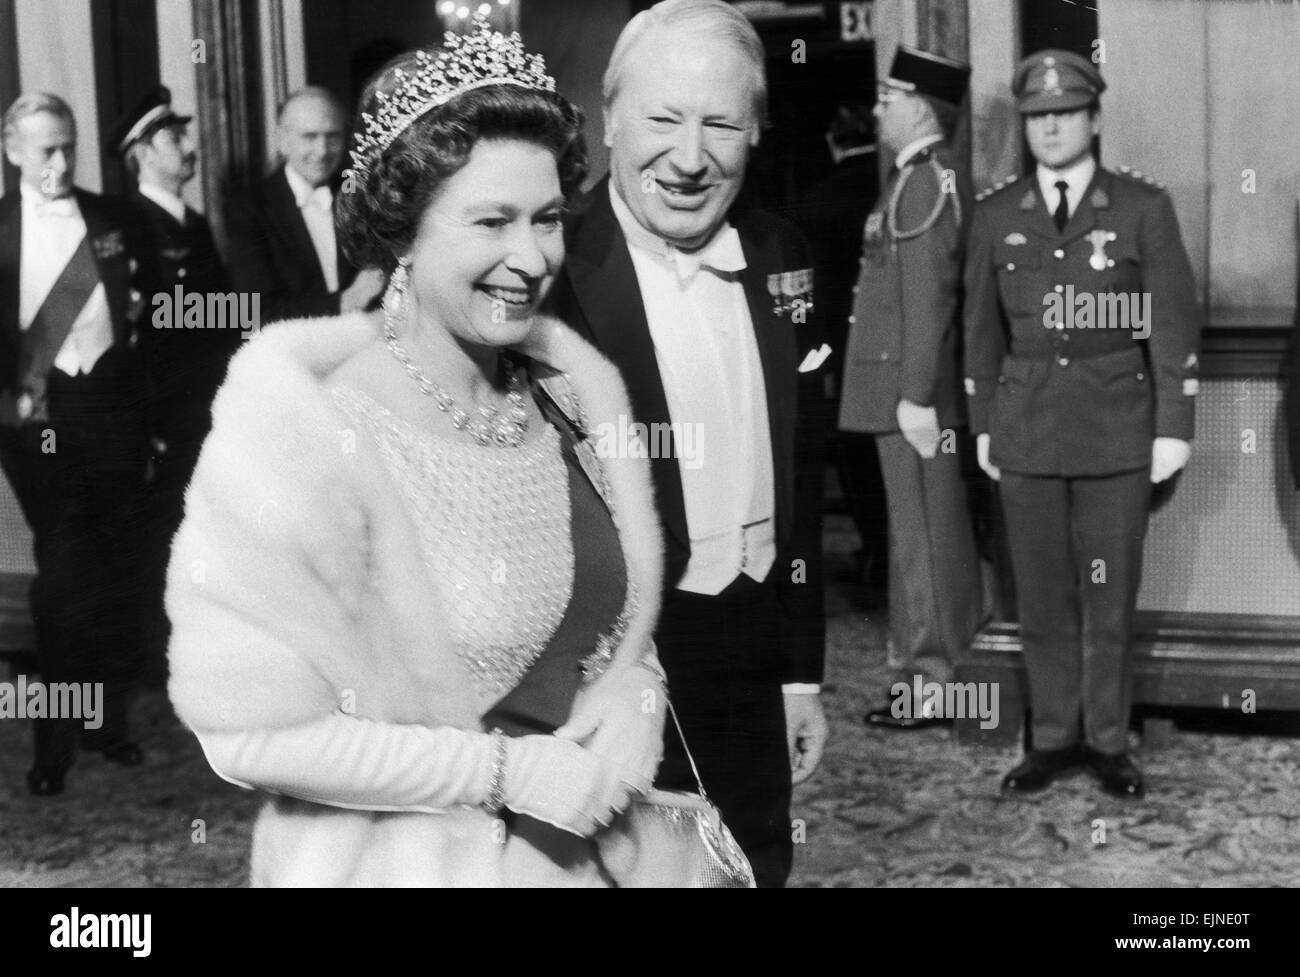 Gala images archive Black and White Stock Photos & Images - Alamy